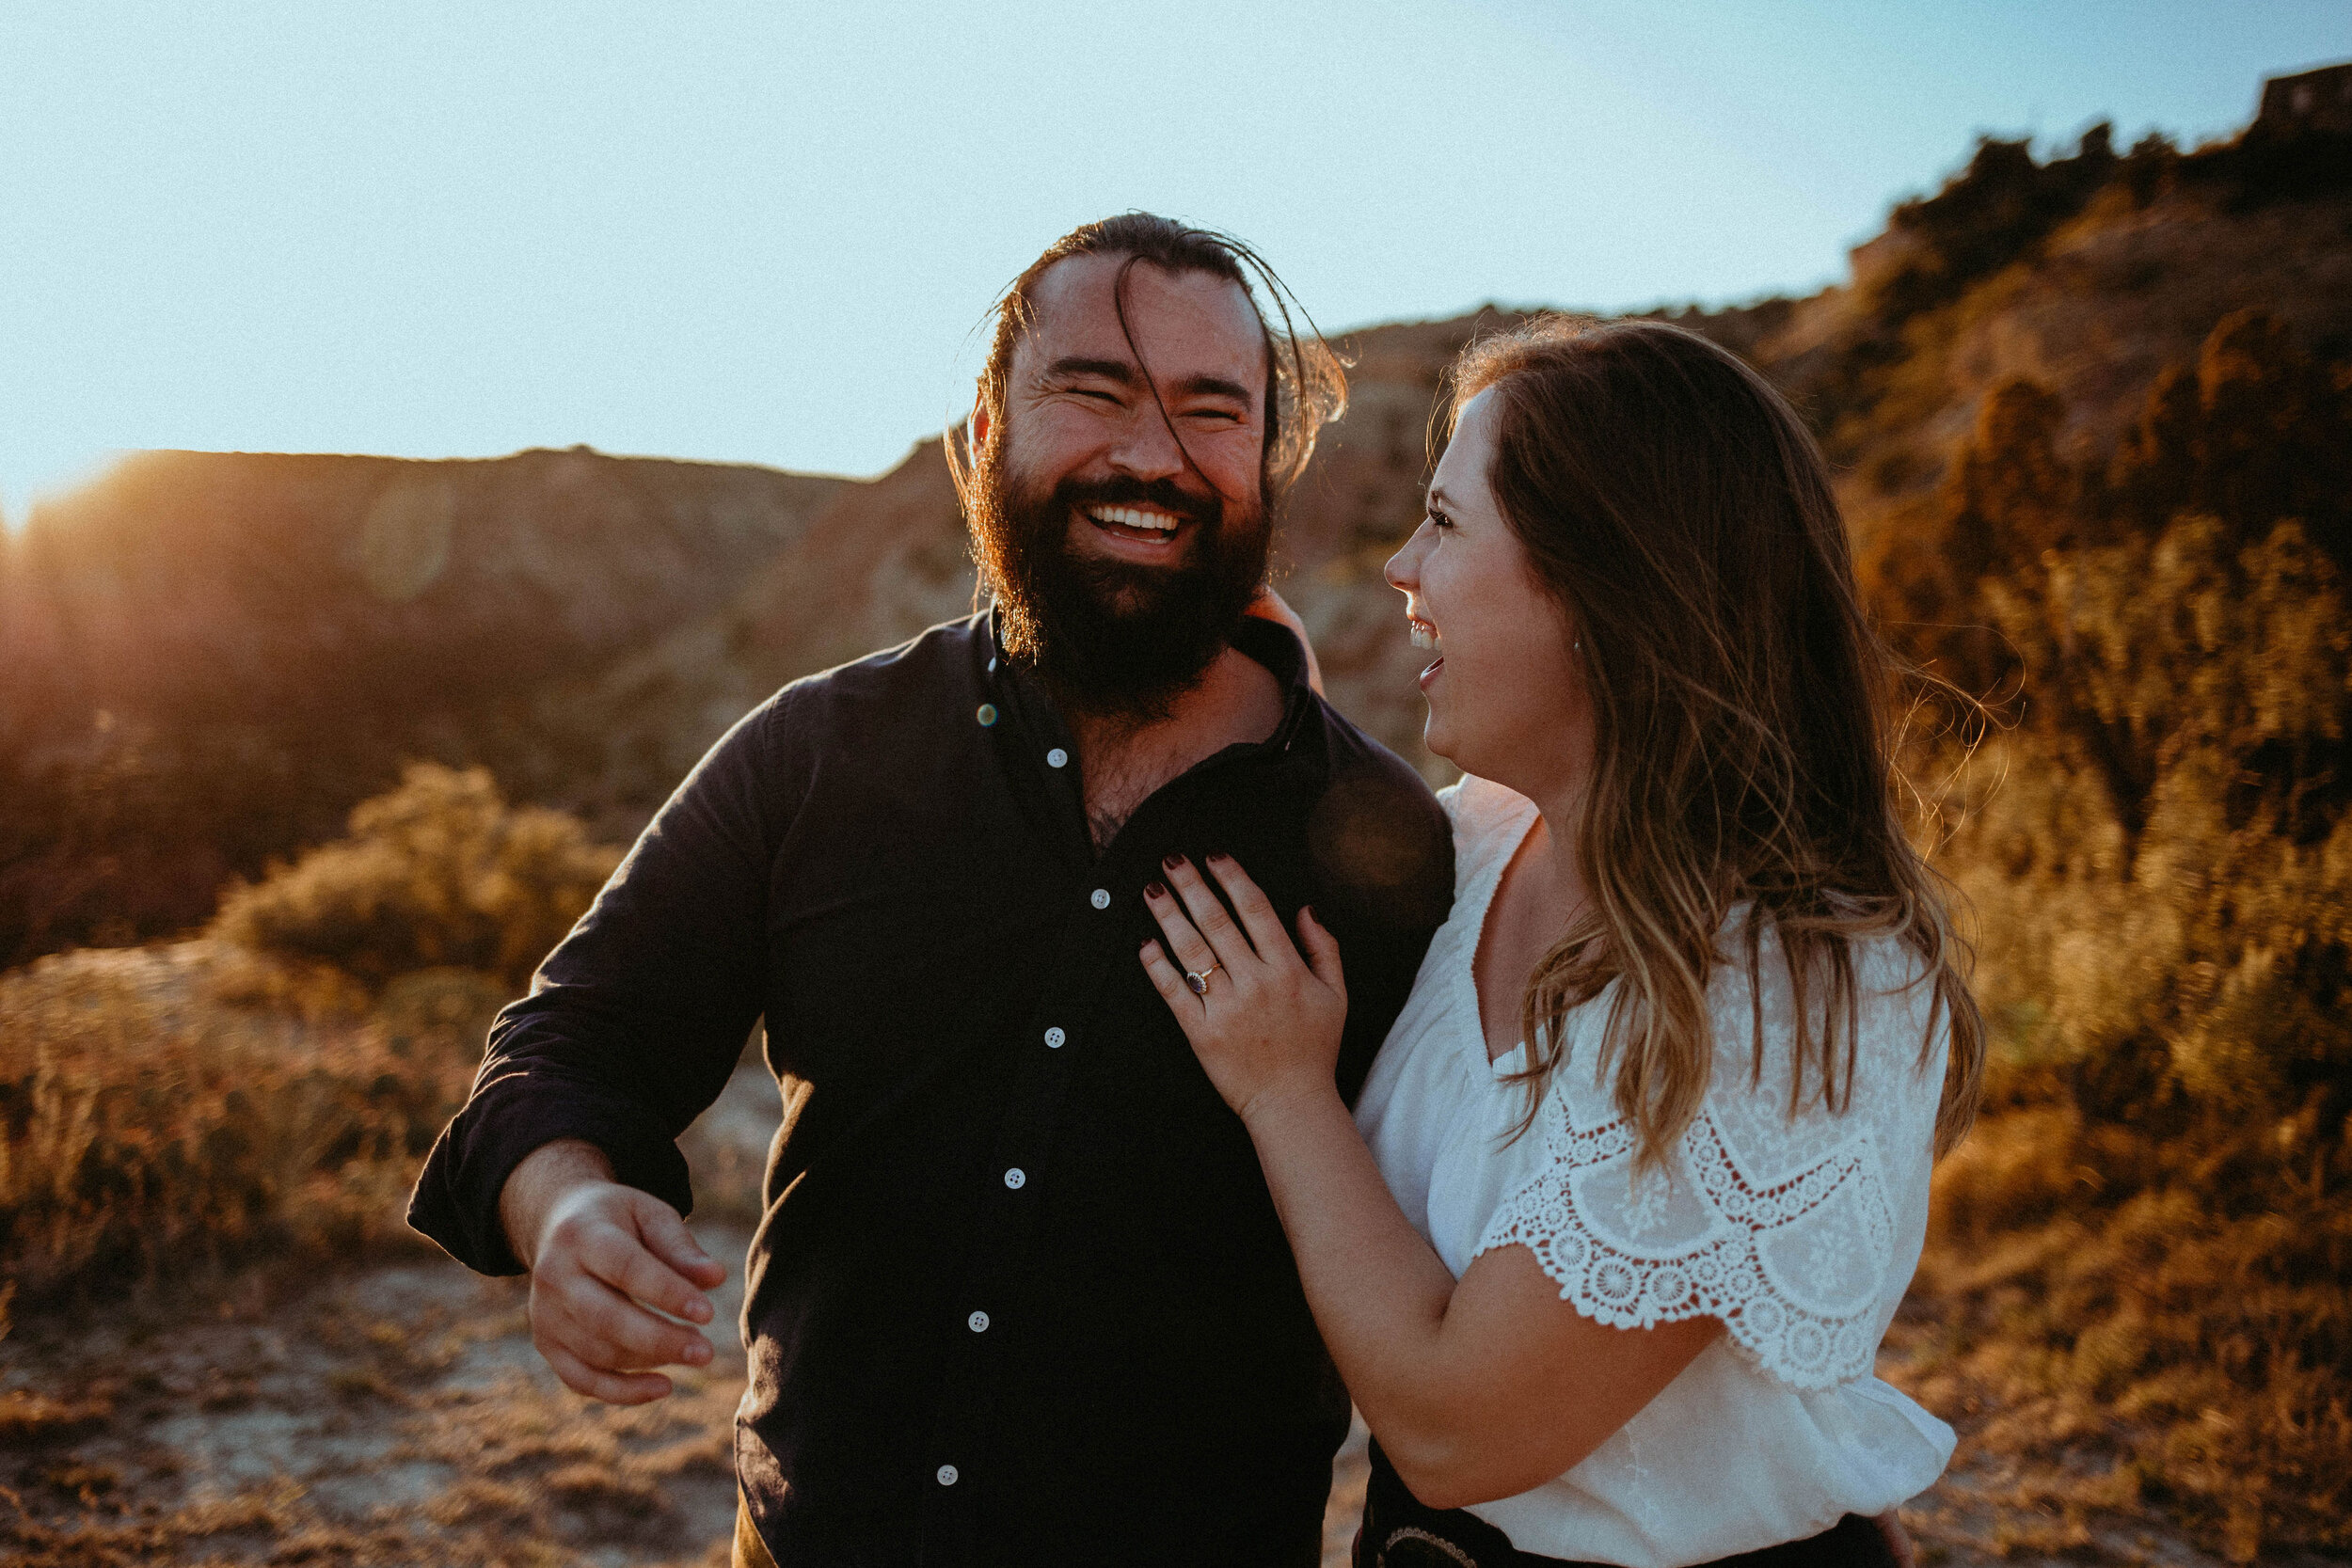 Lubbock Photographers, Kailee Ann Photography, Lubbock Texas Engagement &amp; Wedding Photographer, Photoshoot in Palo Duro Canyon